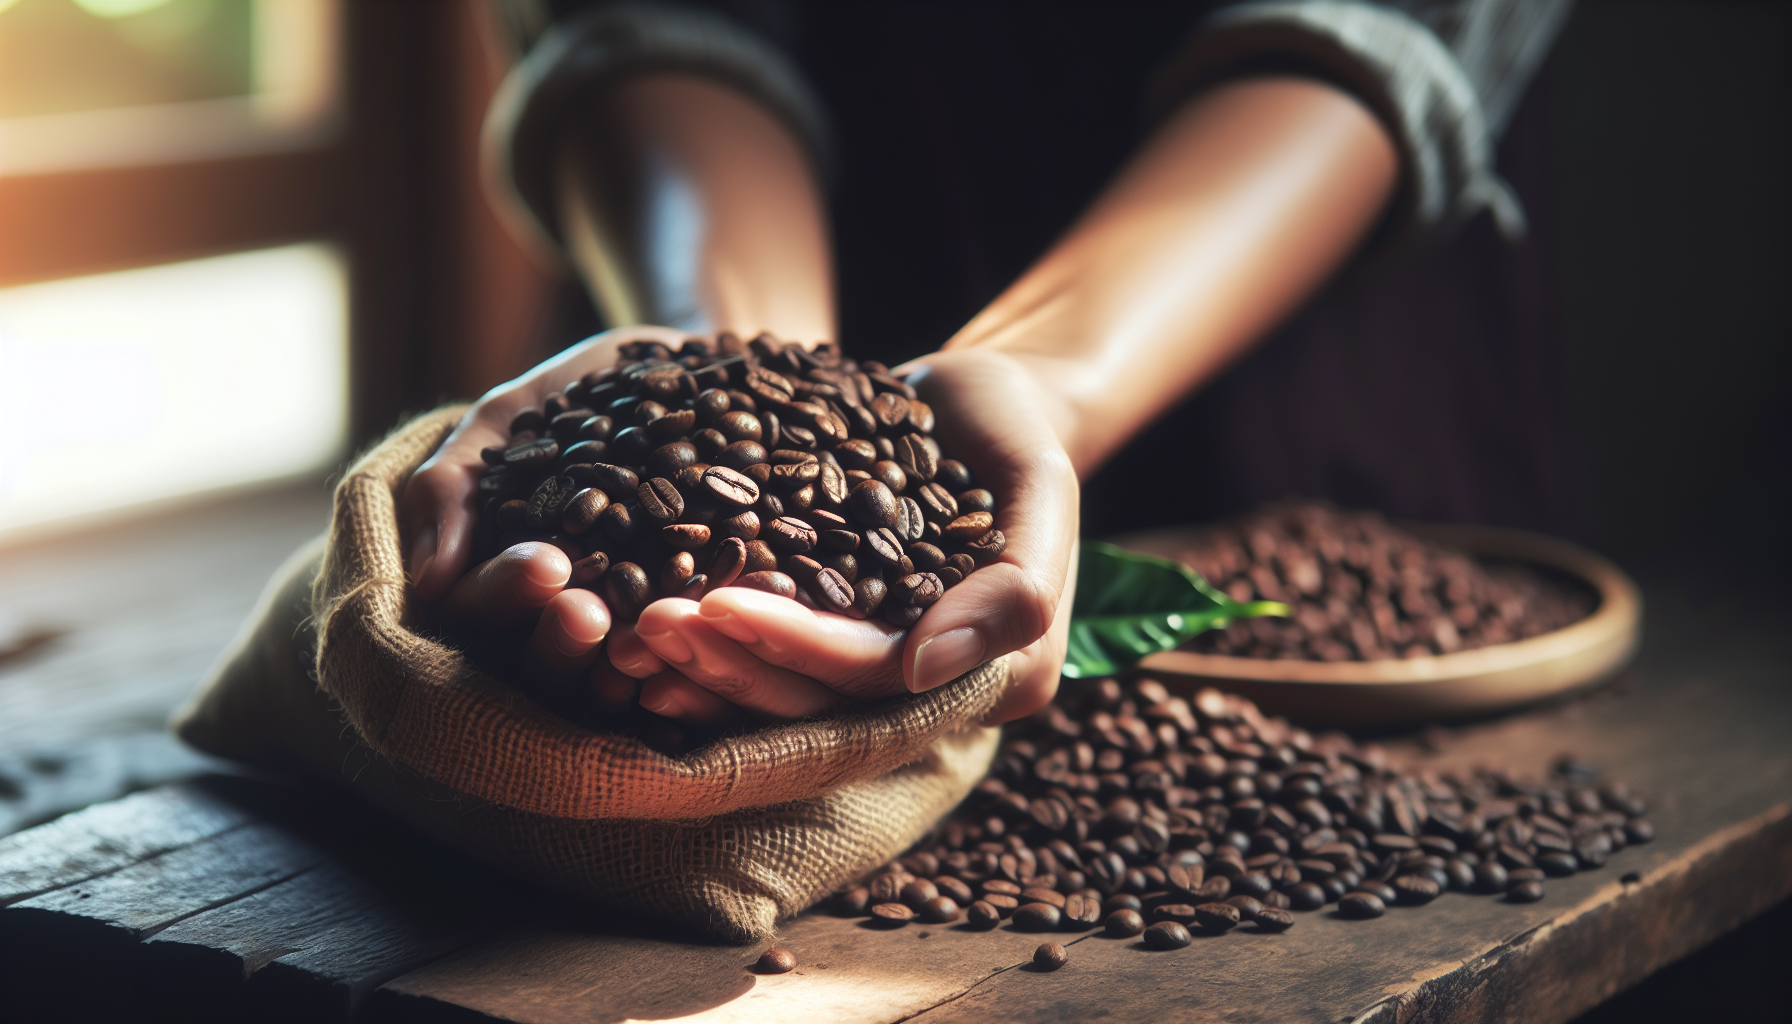 Close-up view of a handful of organically grown coffee beans. The beans are rich and glossy, indicating their freshness. They are held in a woman's hand, her skin is South Asian in descent. She is unl